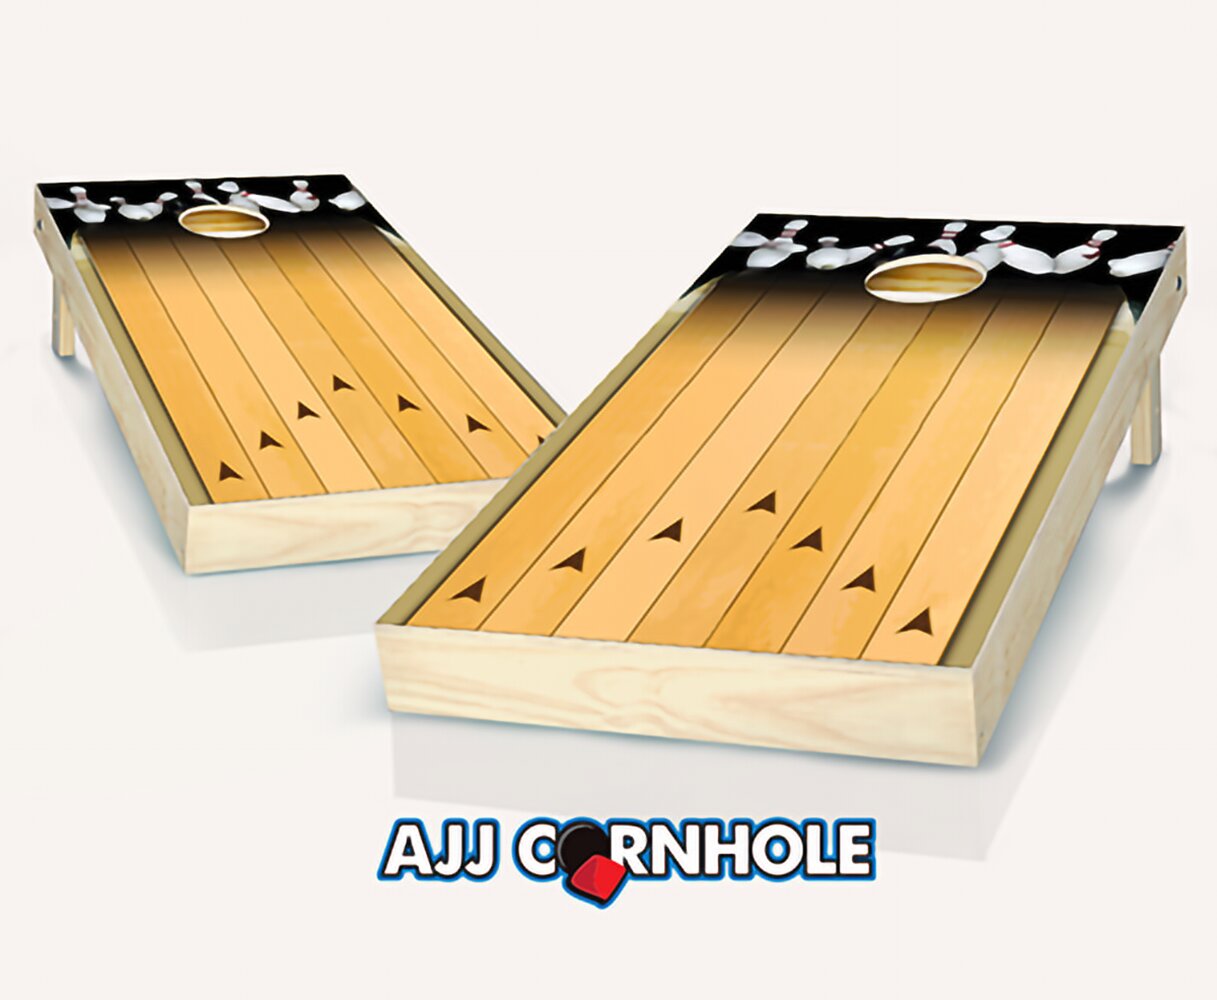 2 Sizes Bowling Alley Cornhole Board Set Many Options Available 